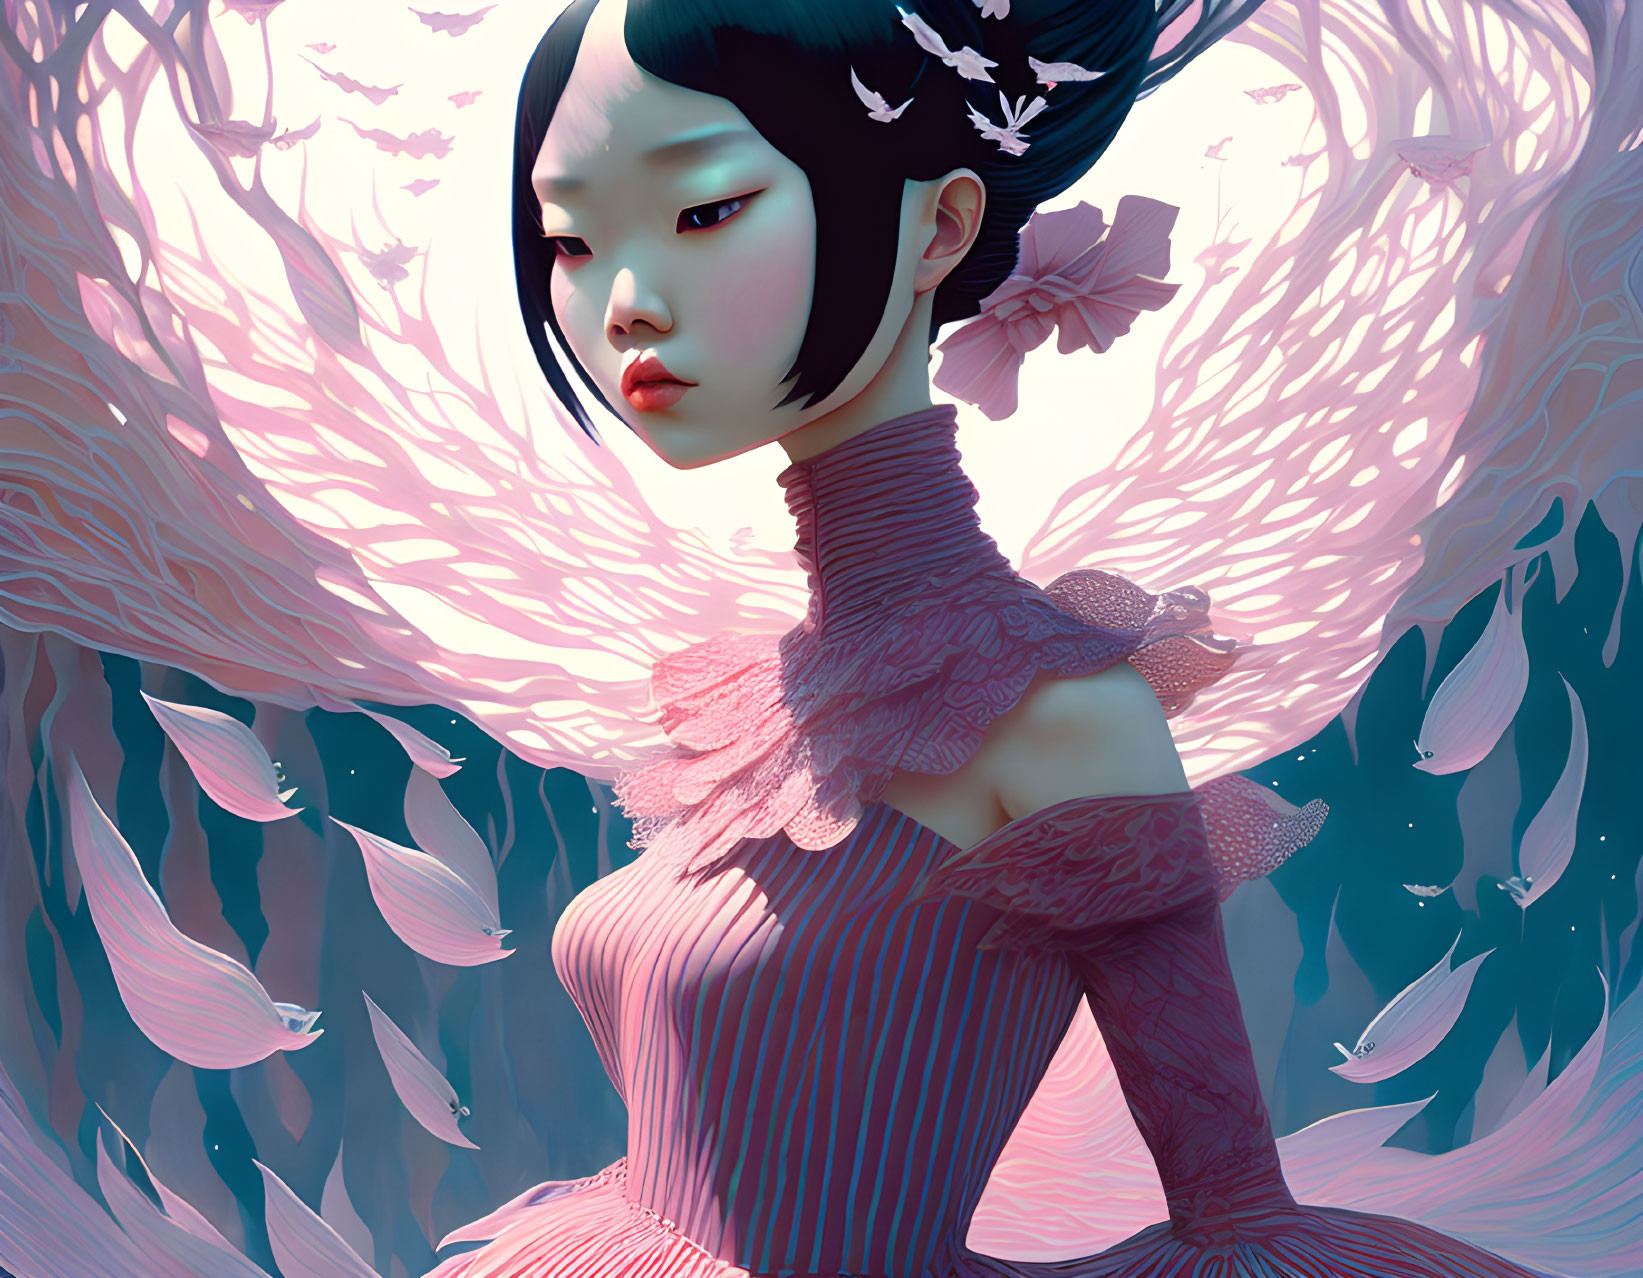 Digital artwork featuring elegant woman in high-collared dress in mystical forest with pink blossoms and floating